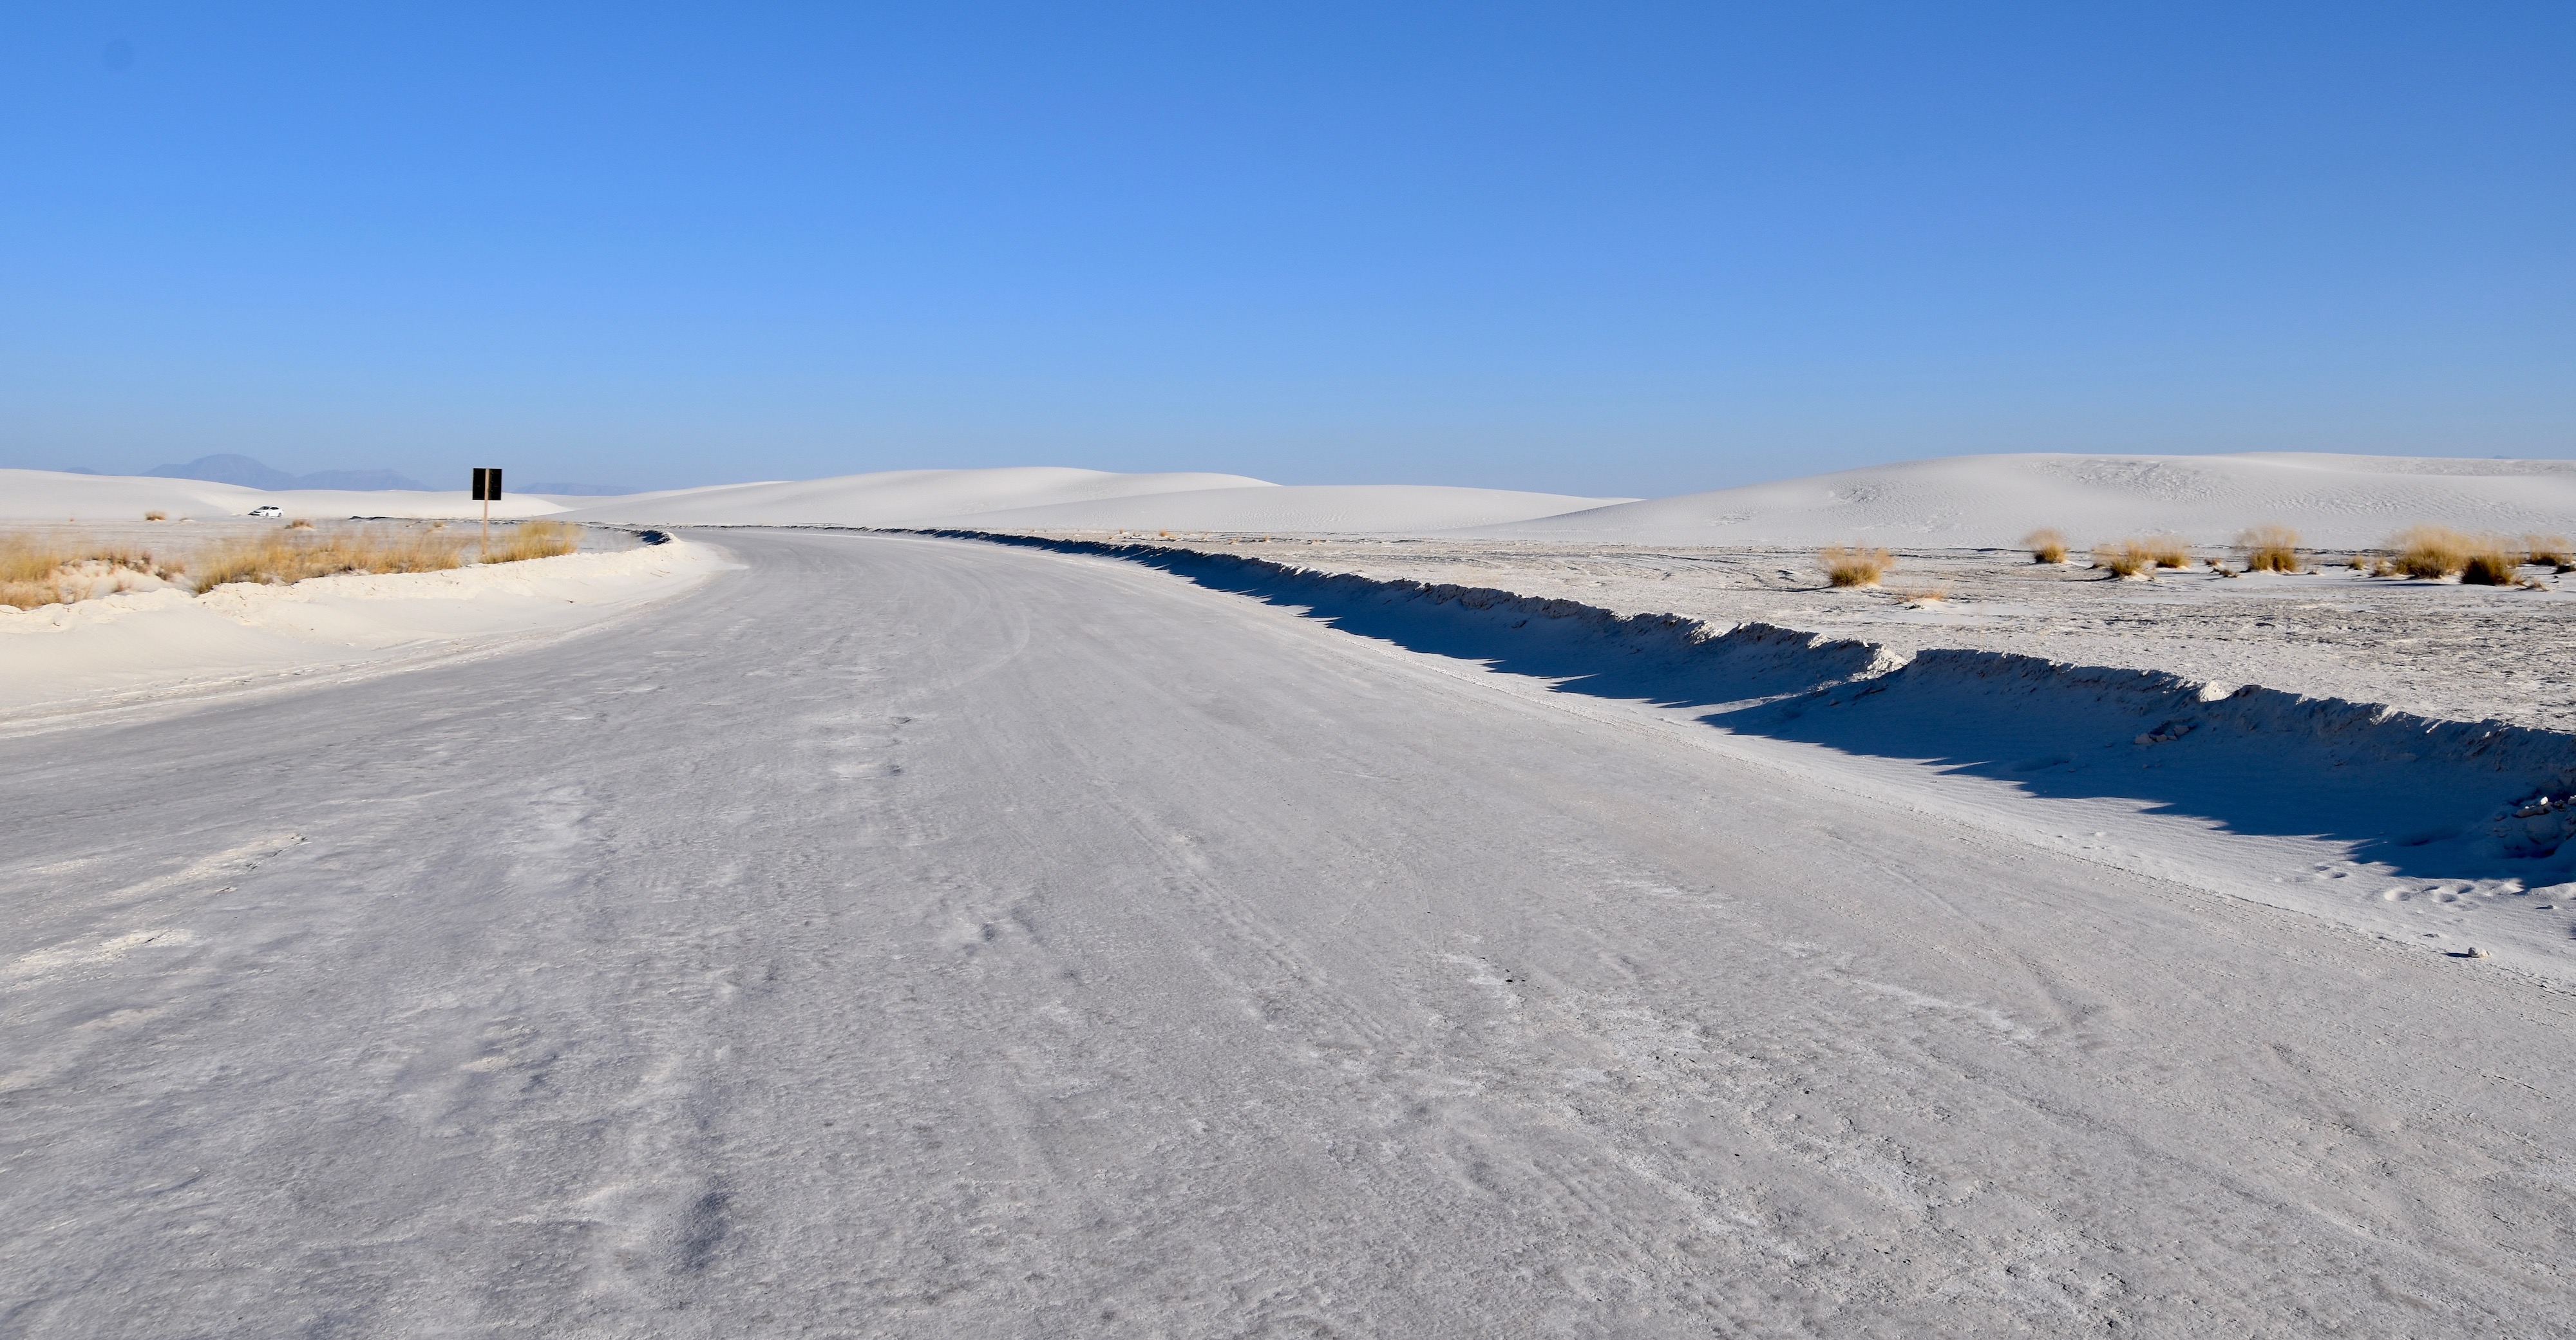  Icy Road, White Sands N.P.